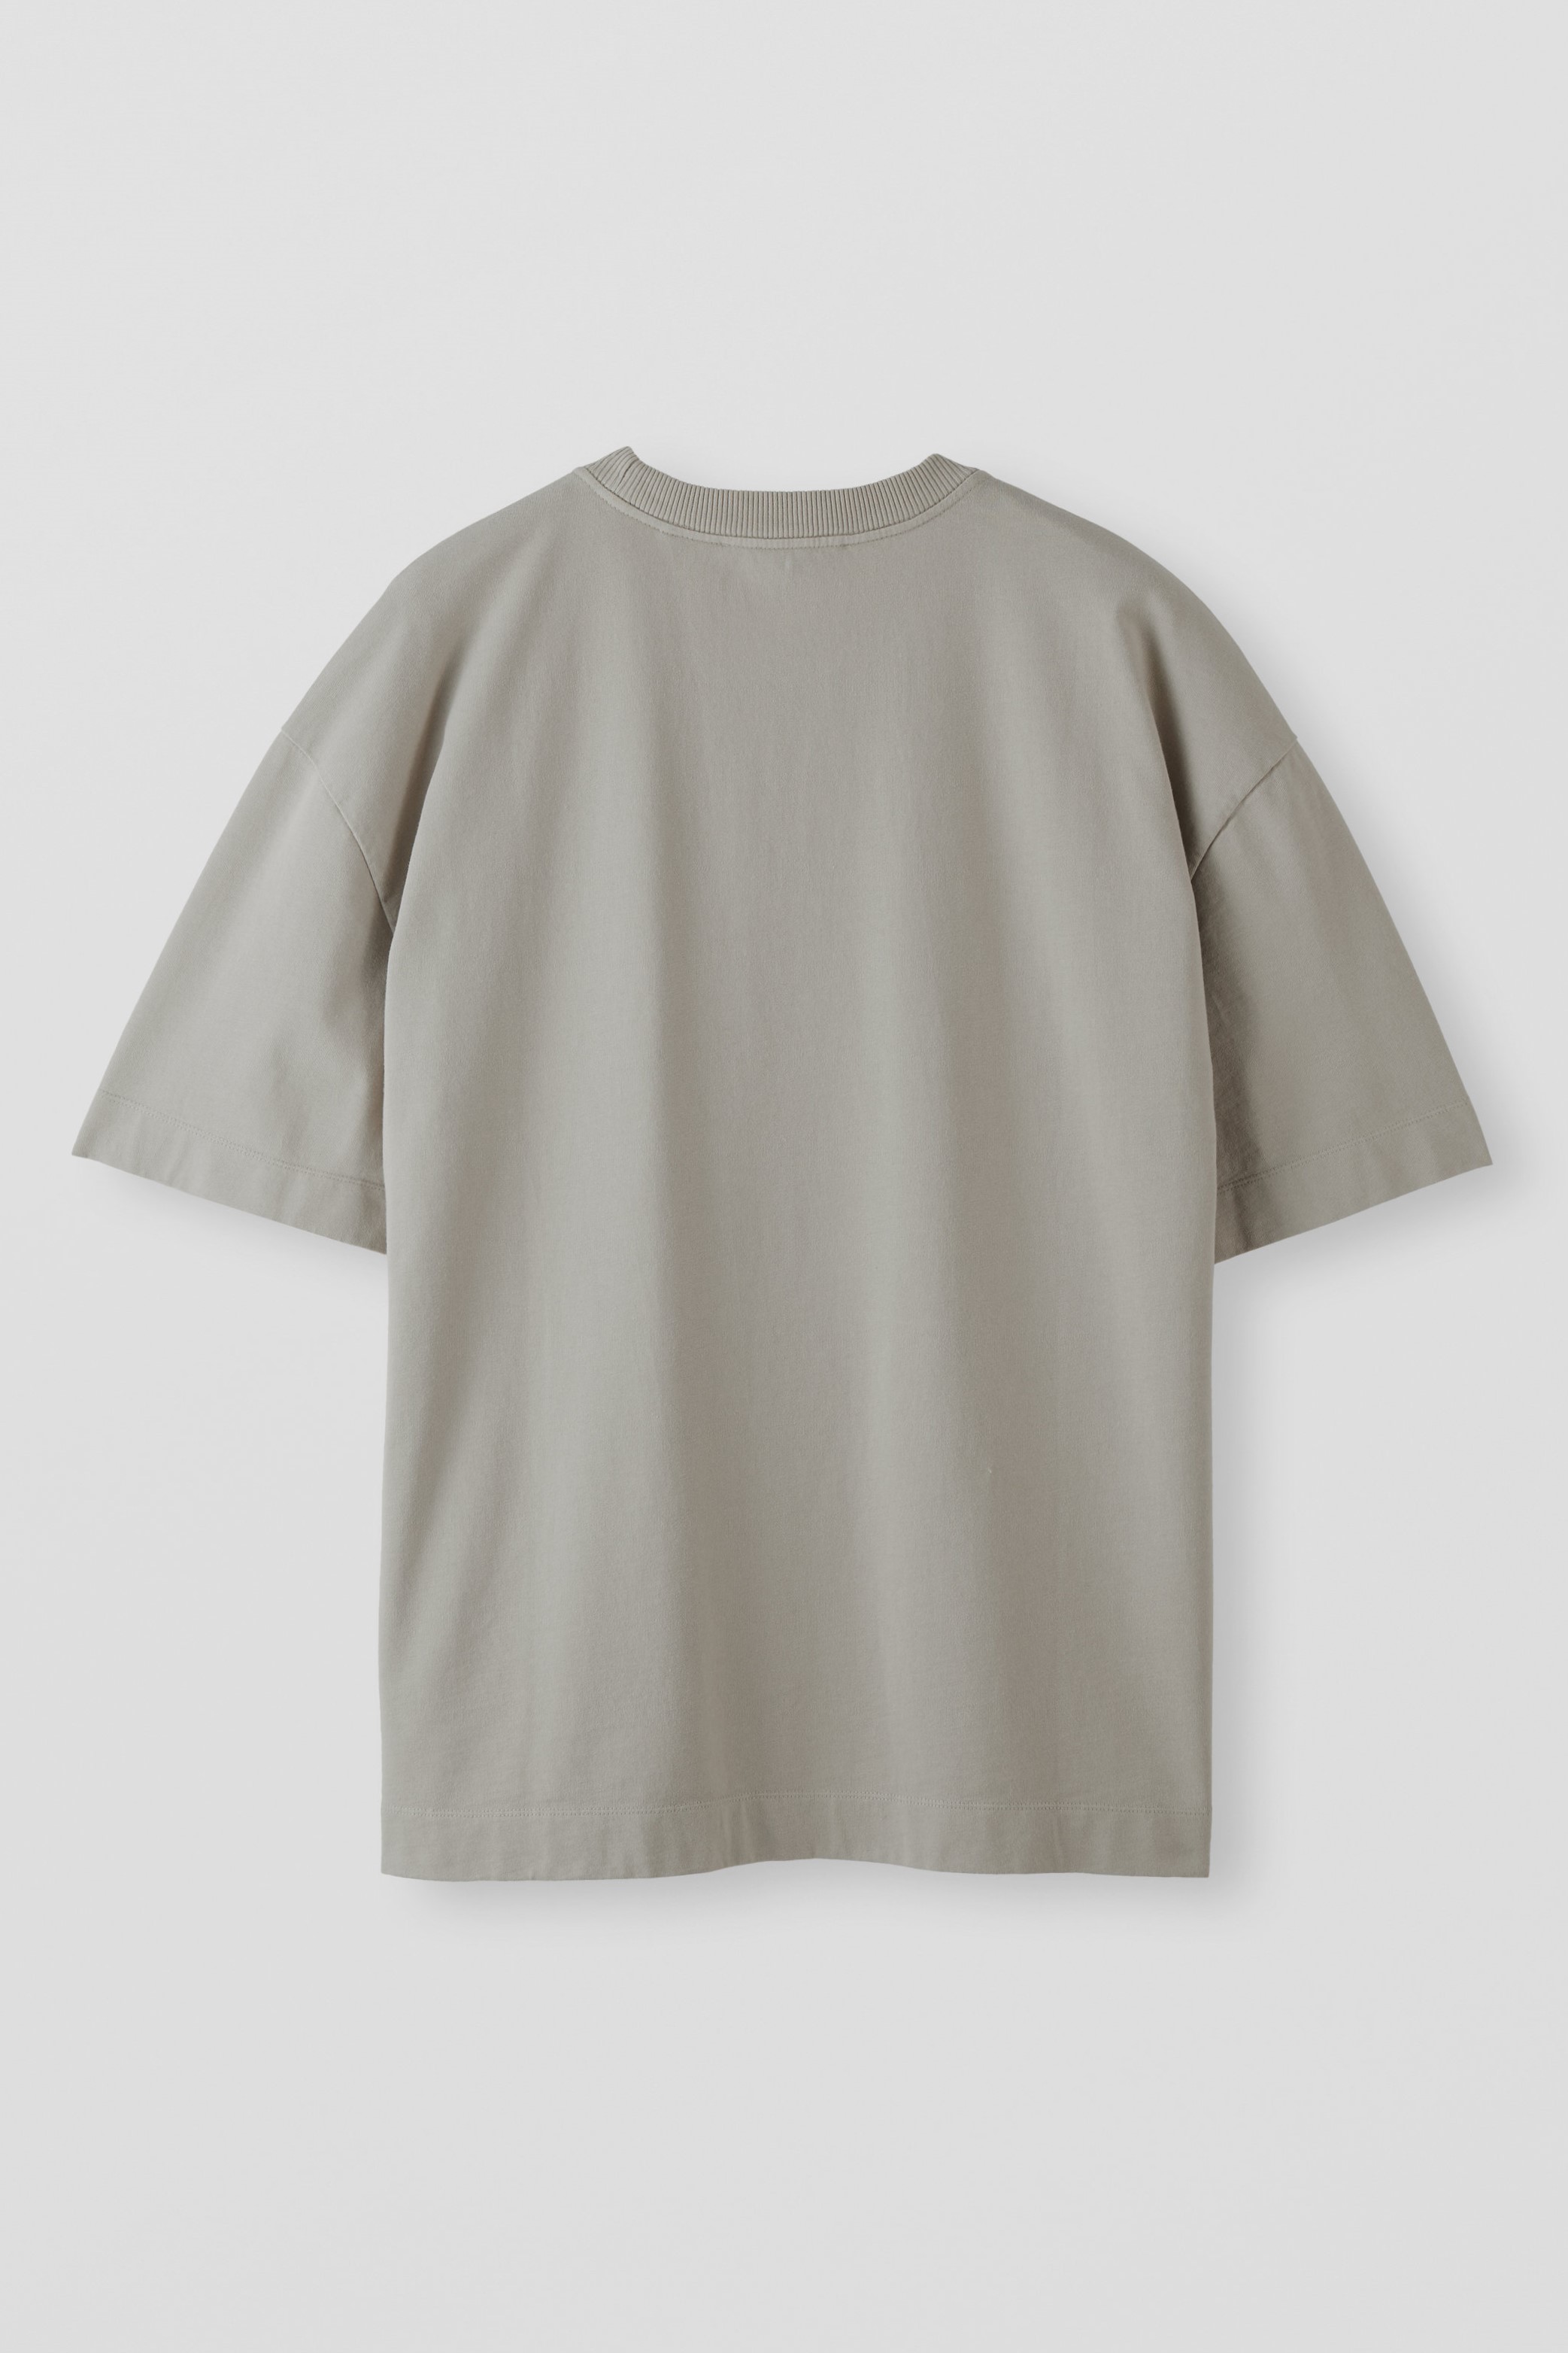 APPLIED ART FORMS Oversize T-Shirt in Ghost Grey S